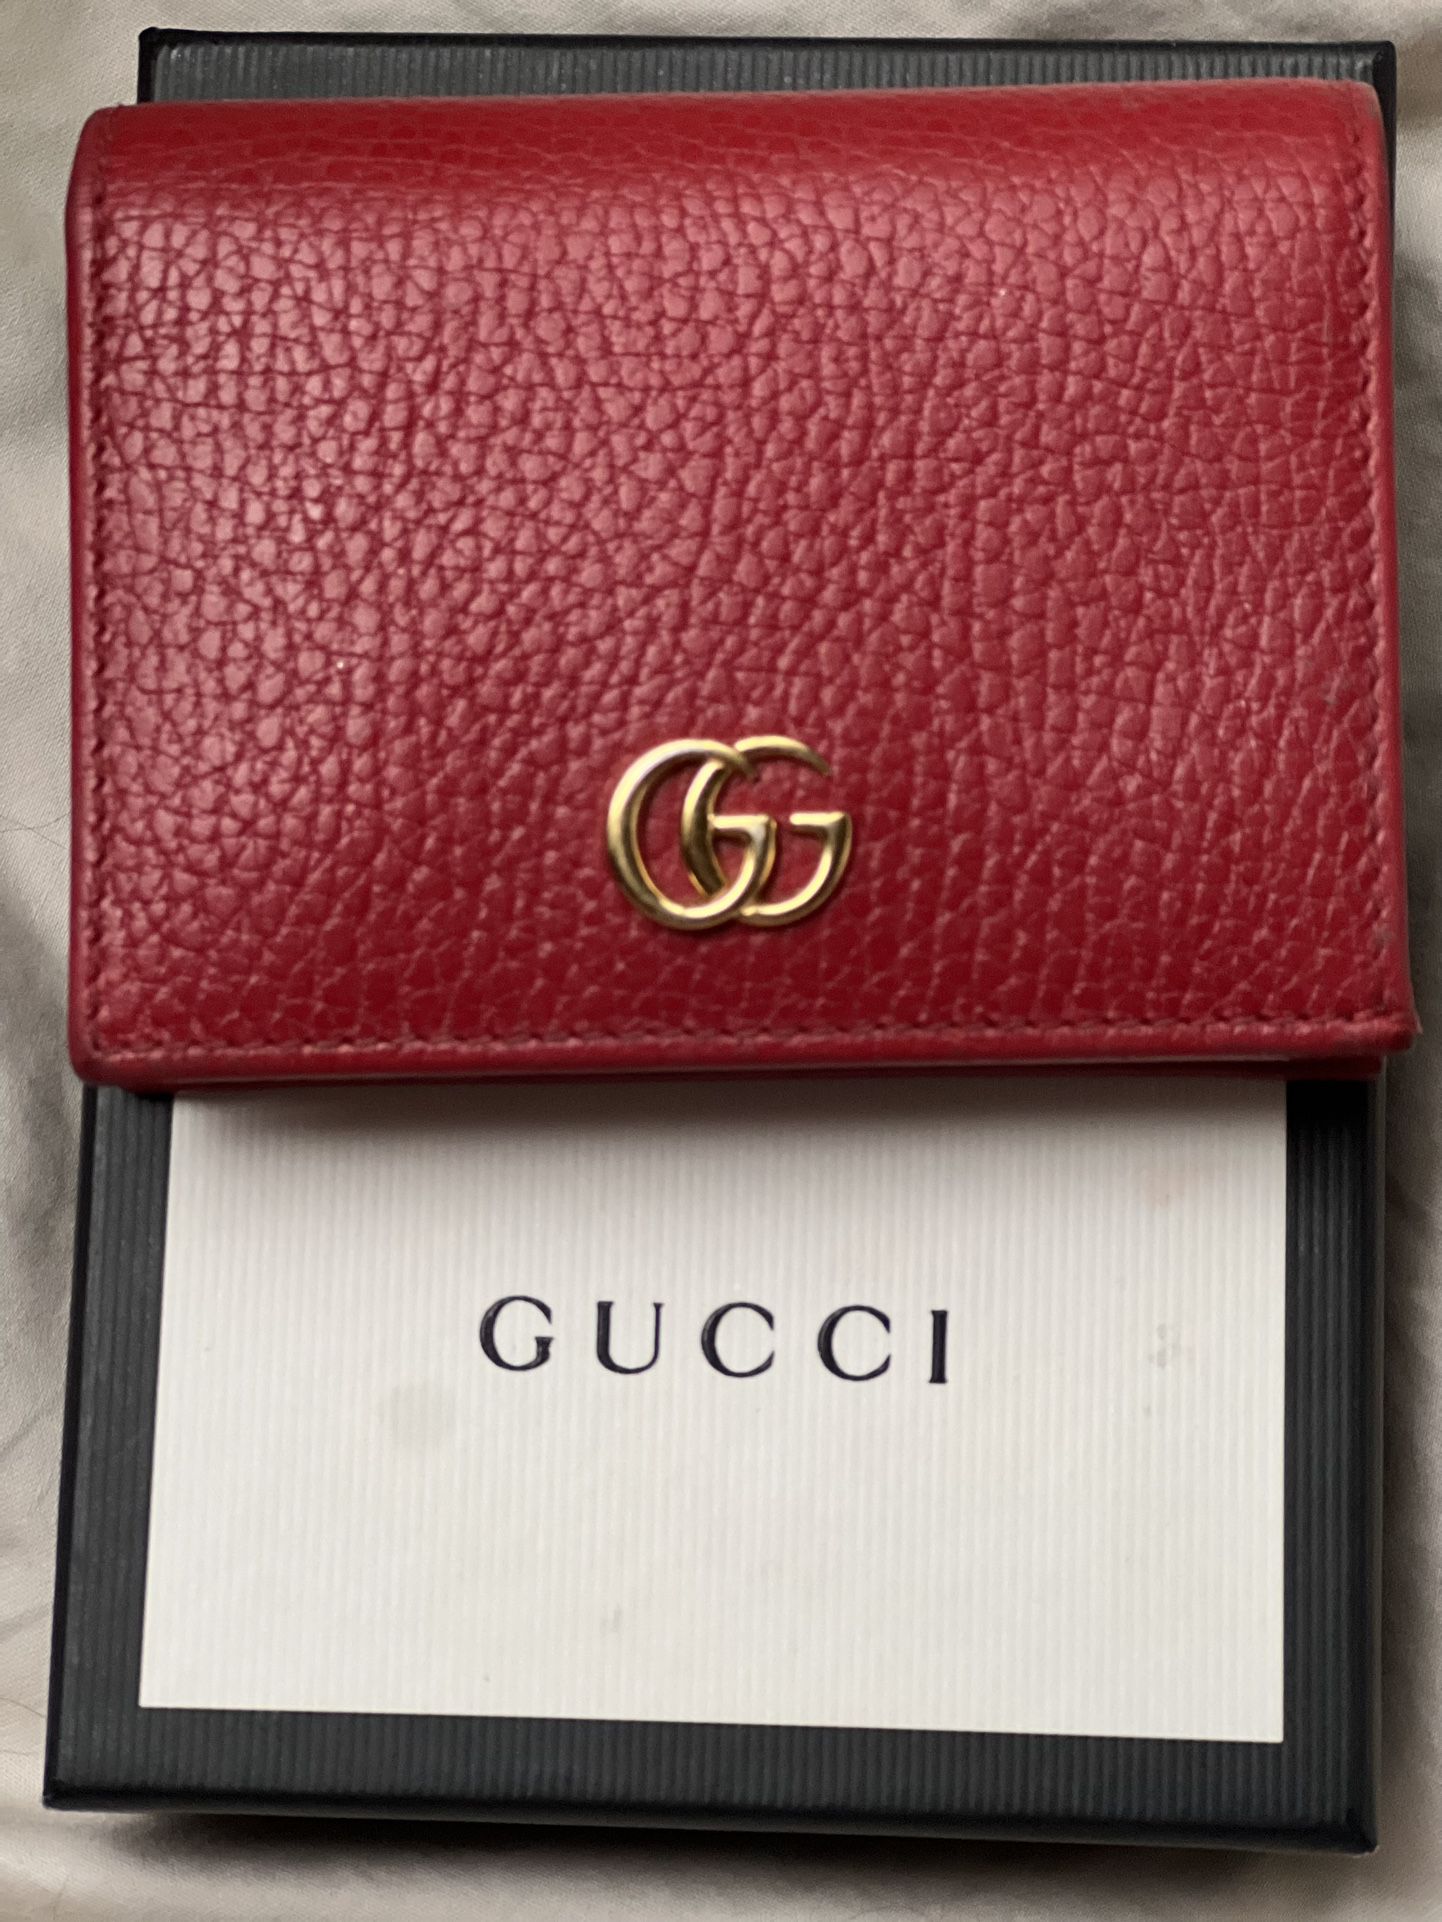 Authentic Gucci Marmont Leather Compact Wallet 